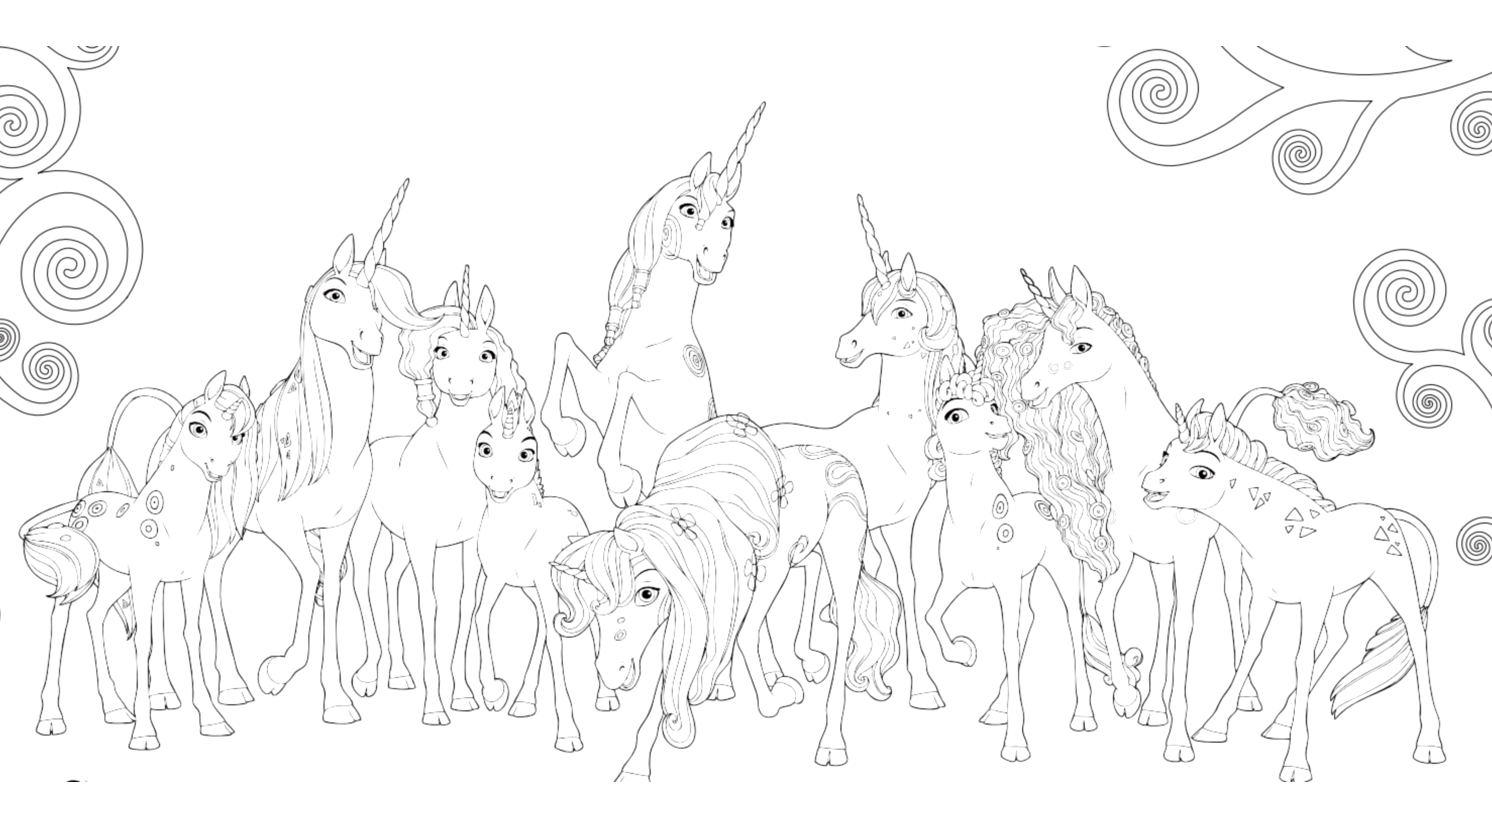 A coloring page full of unicorns straight out of Mia and me!